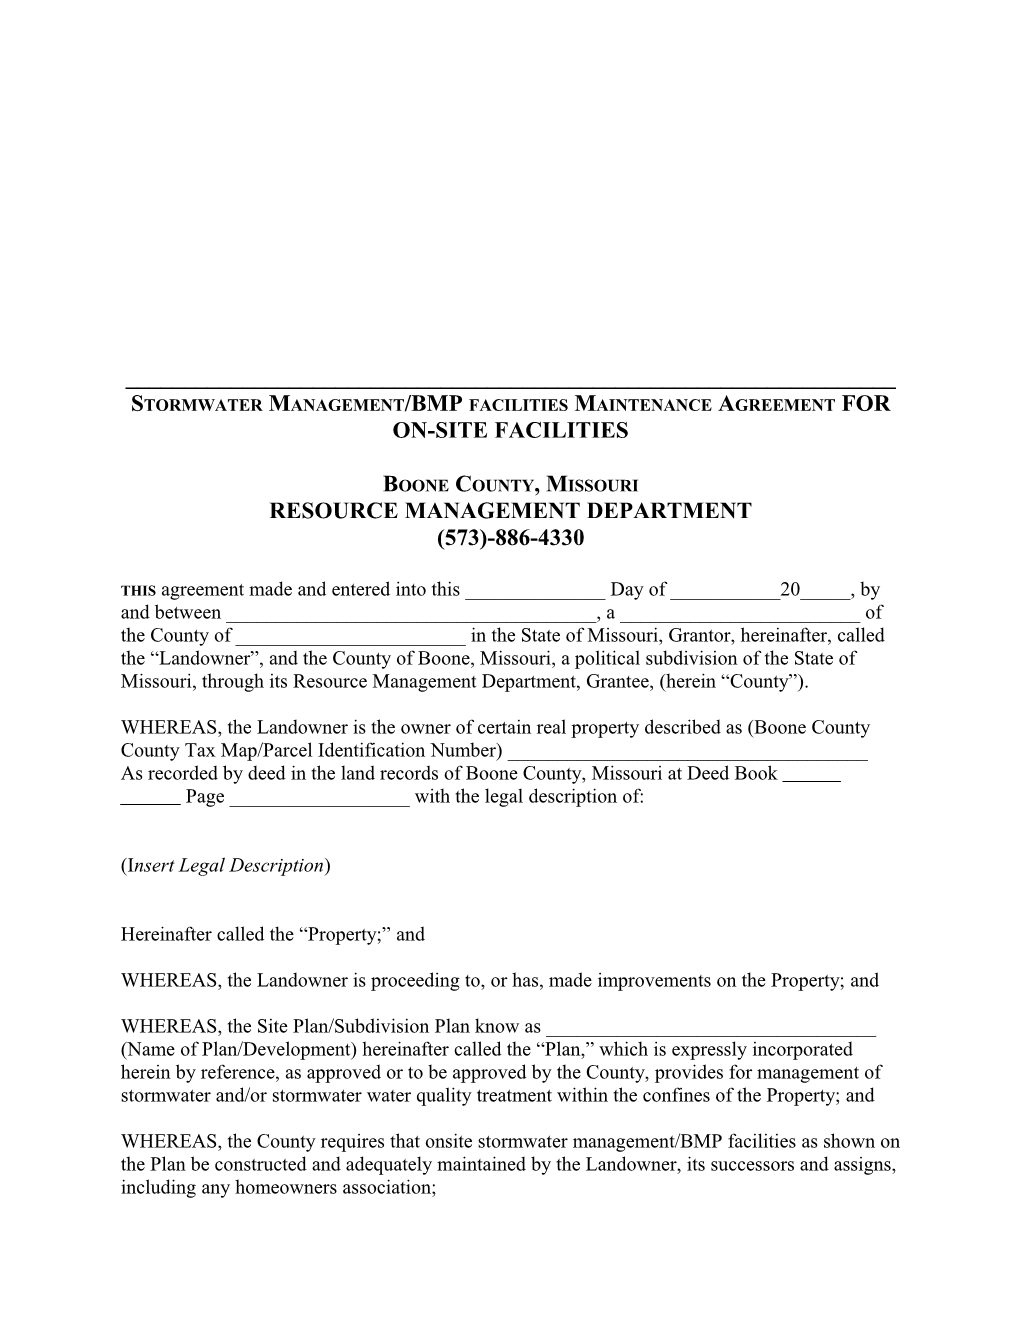 Stormwater Management/Bmp Facilities Agreement